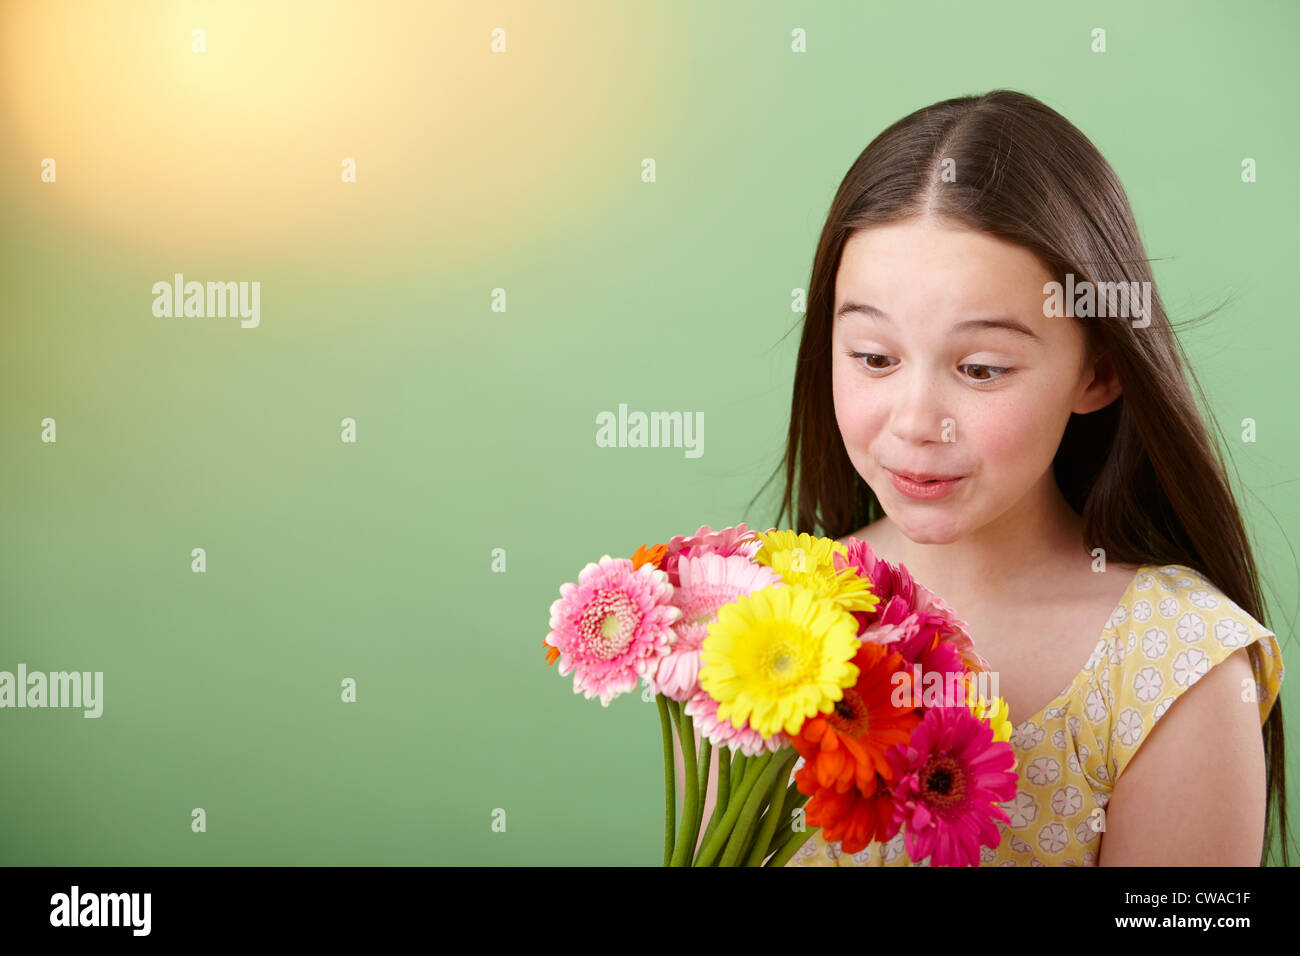 Girl with bunch of flowers Stock Photo